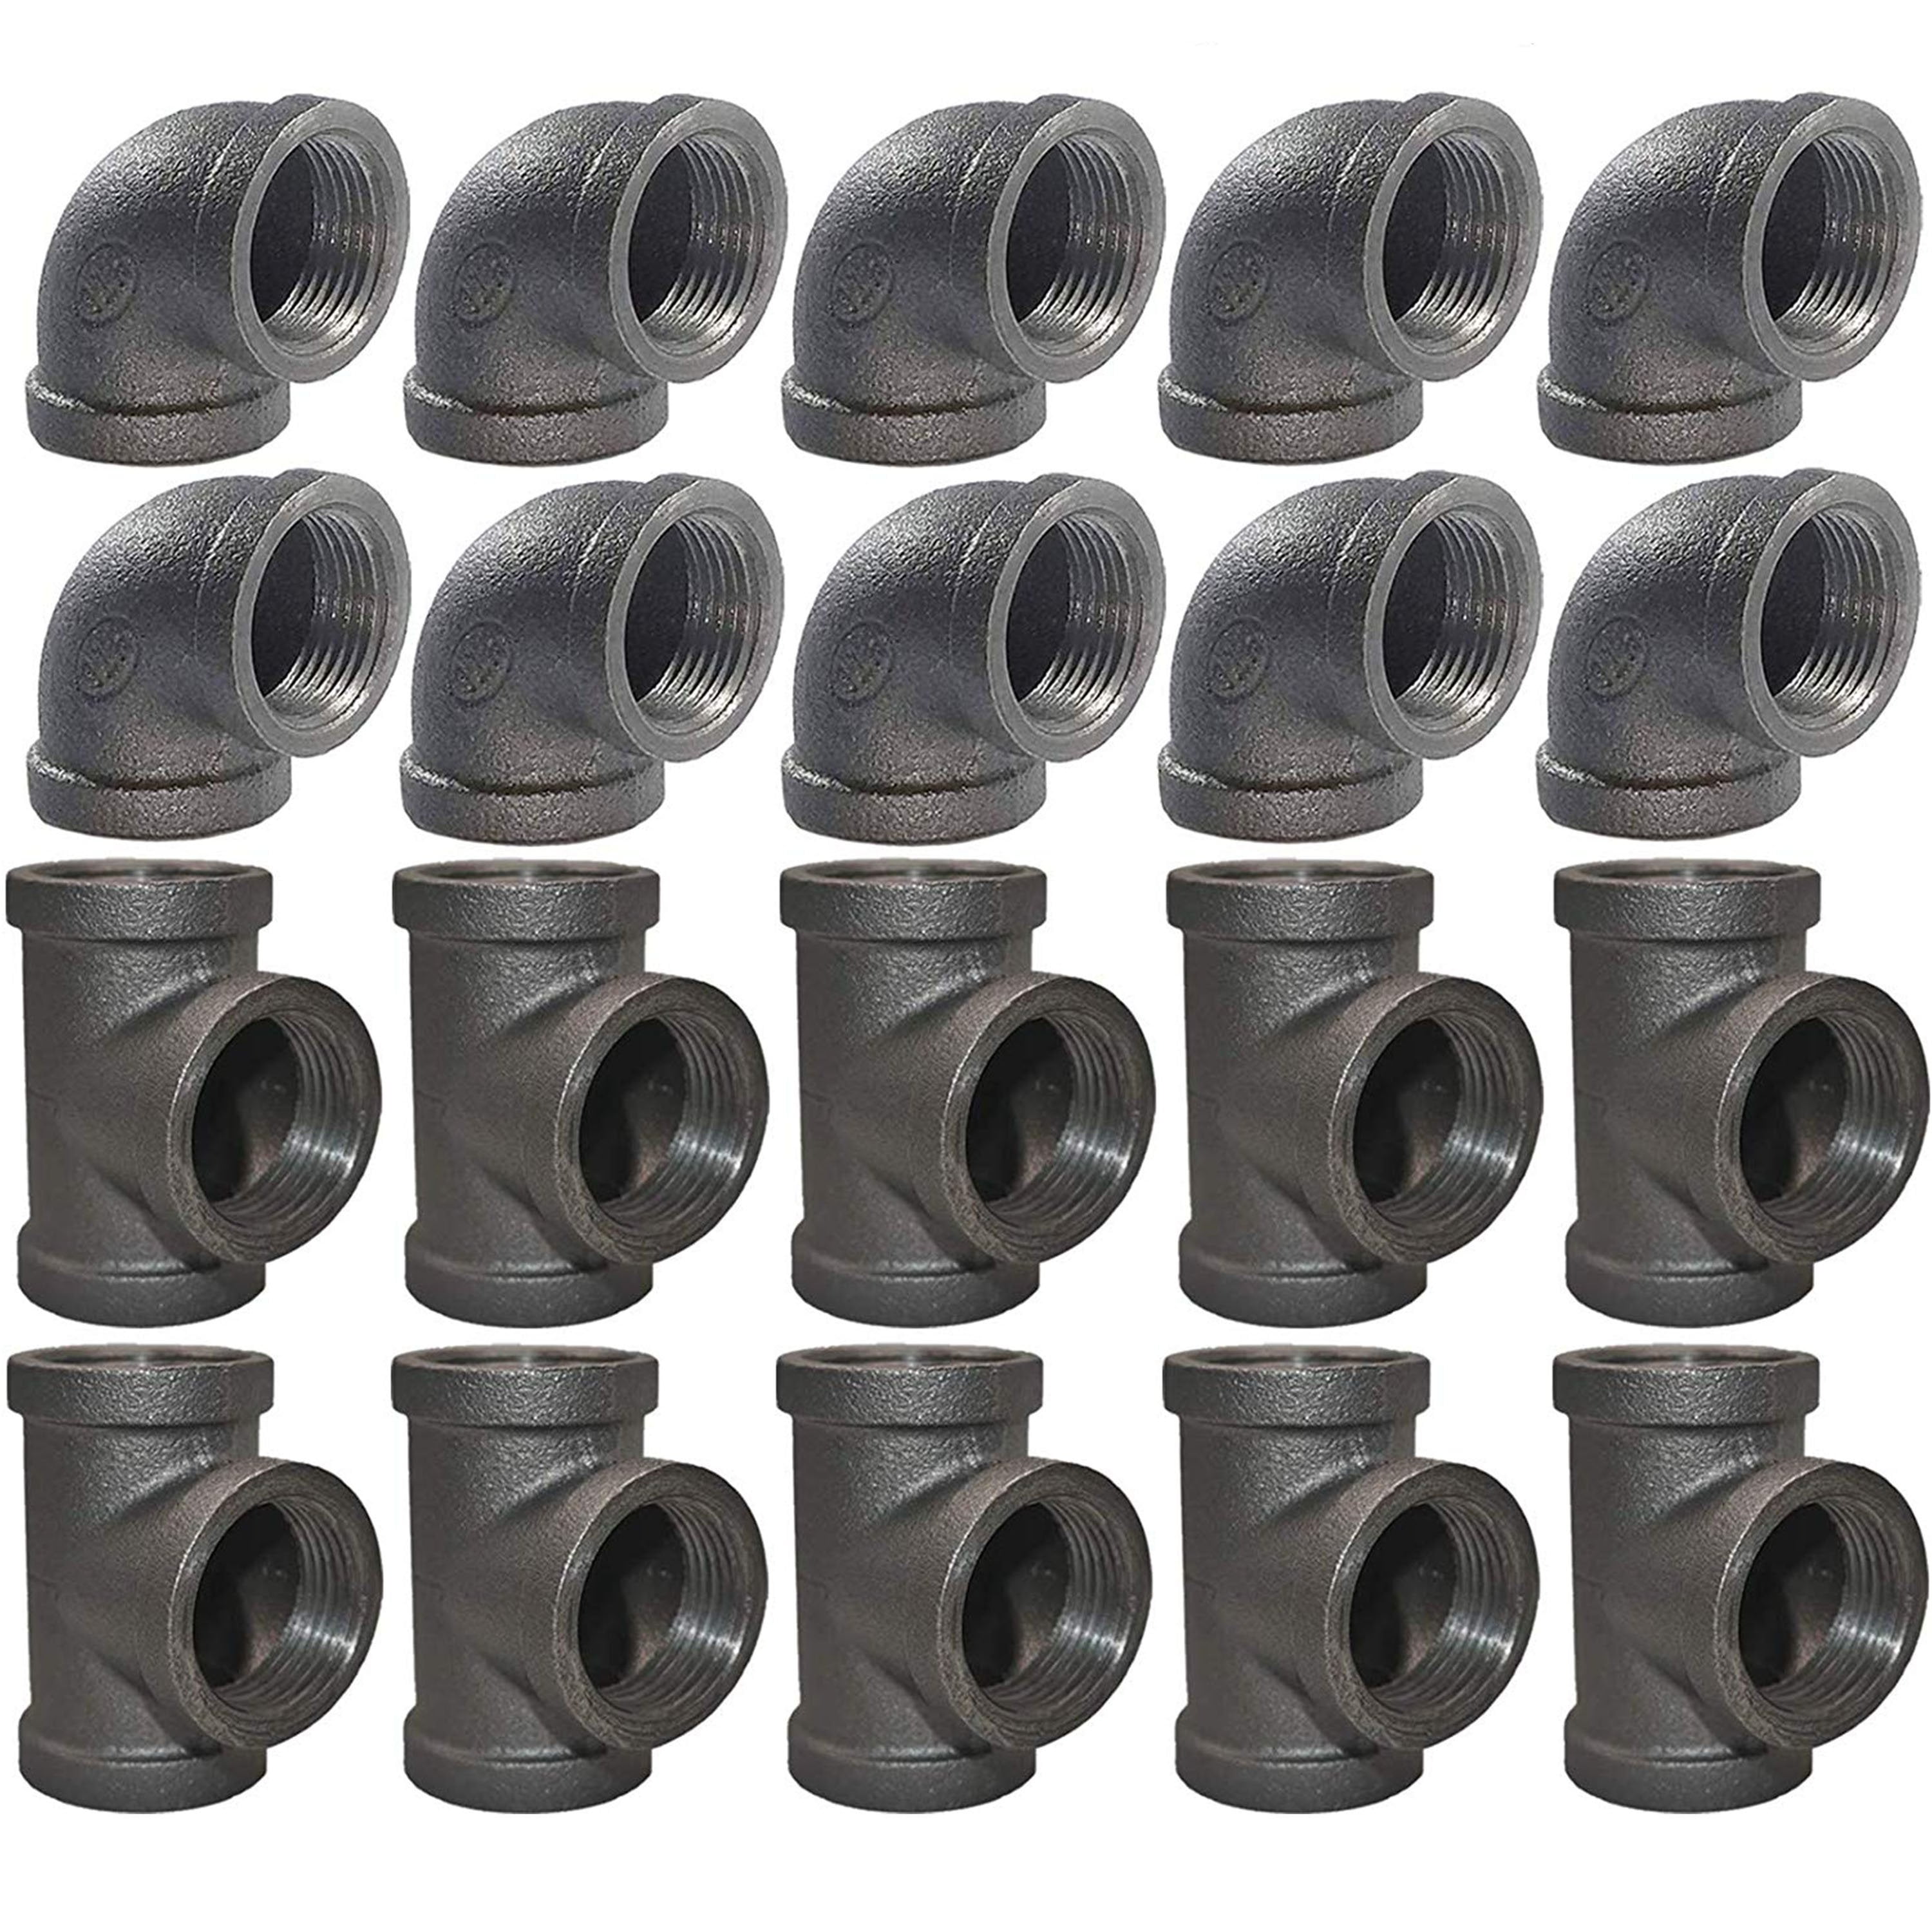 1/2 Inches x 8 Inches Black Painted Malleable Steel Pipe Fitting,Black Malleable Carbon Steel Pipe Nipples and Fittings,Threaded Pipe Nipple for DIY Vintage Furniture 10 Pack